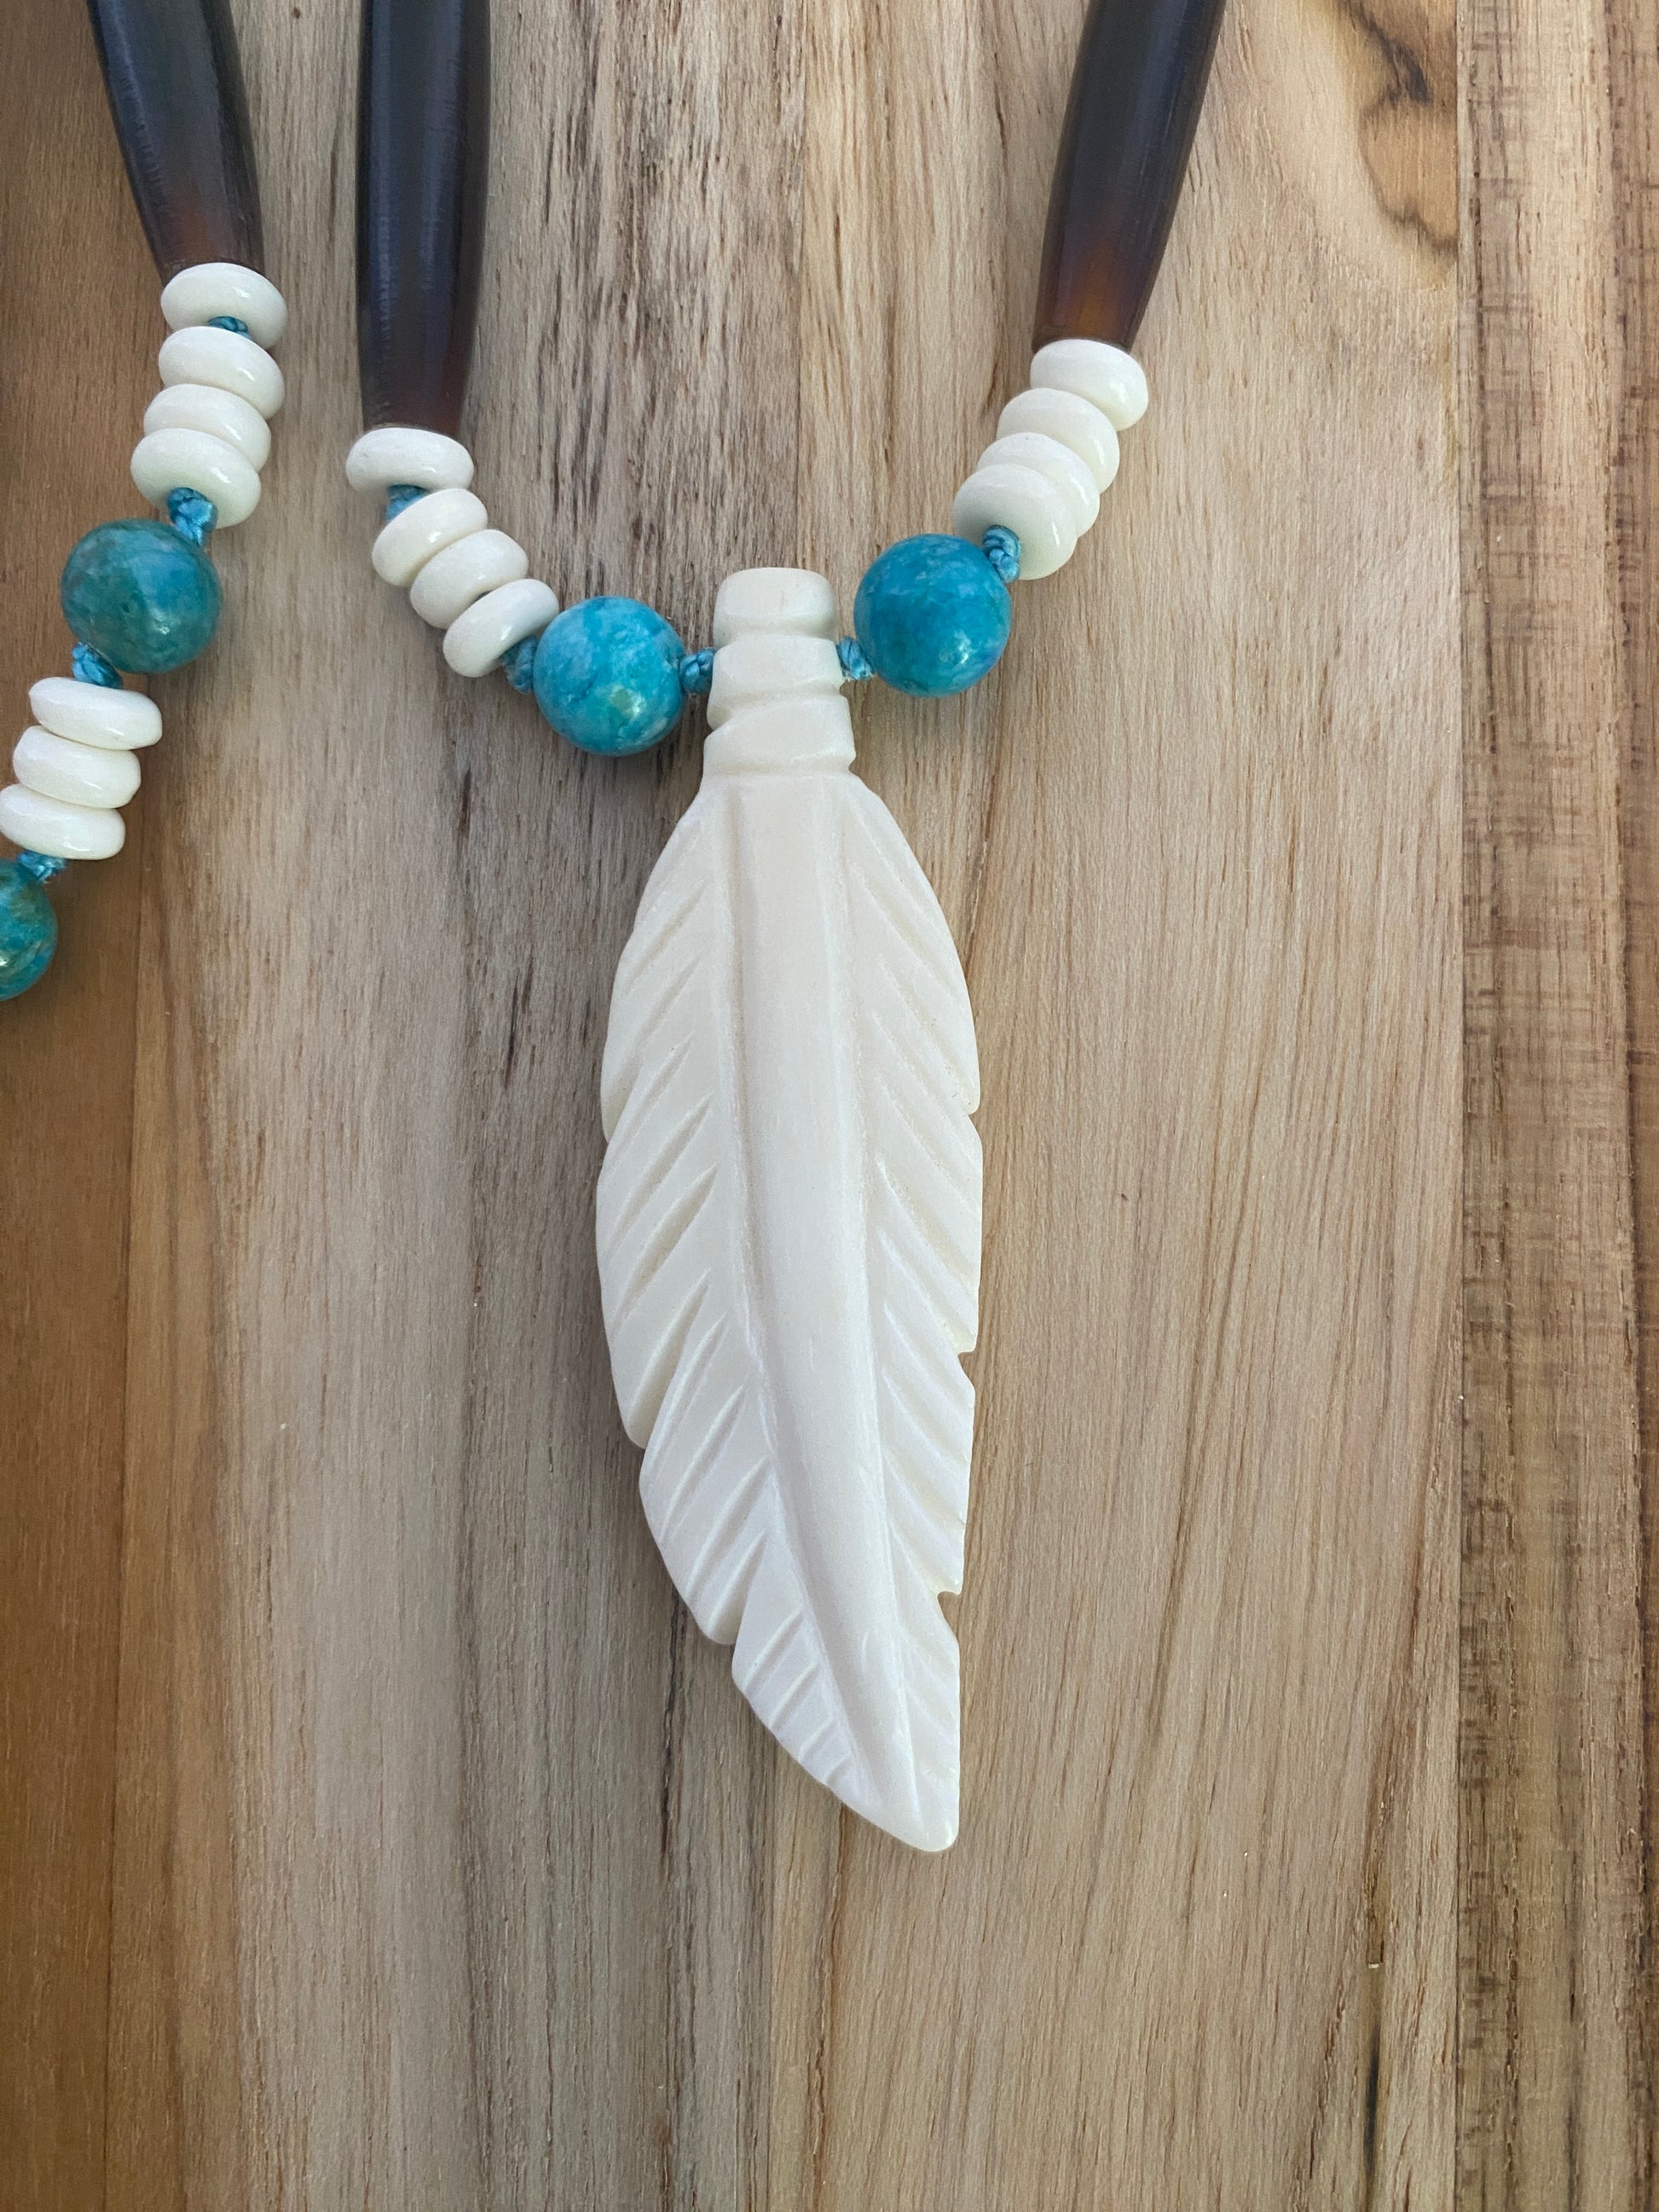 28" Long Feather Necklace with Brown & Turquoise Beads - My Urban Gems